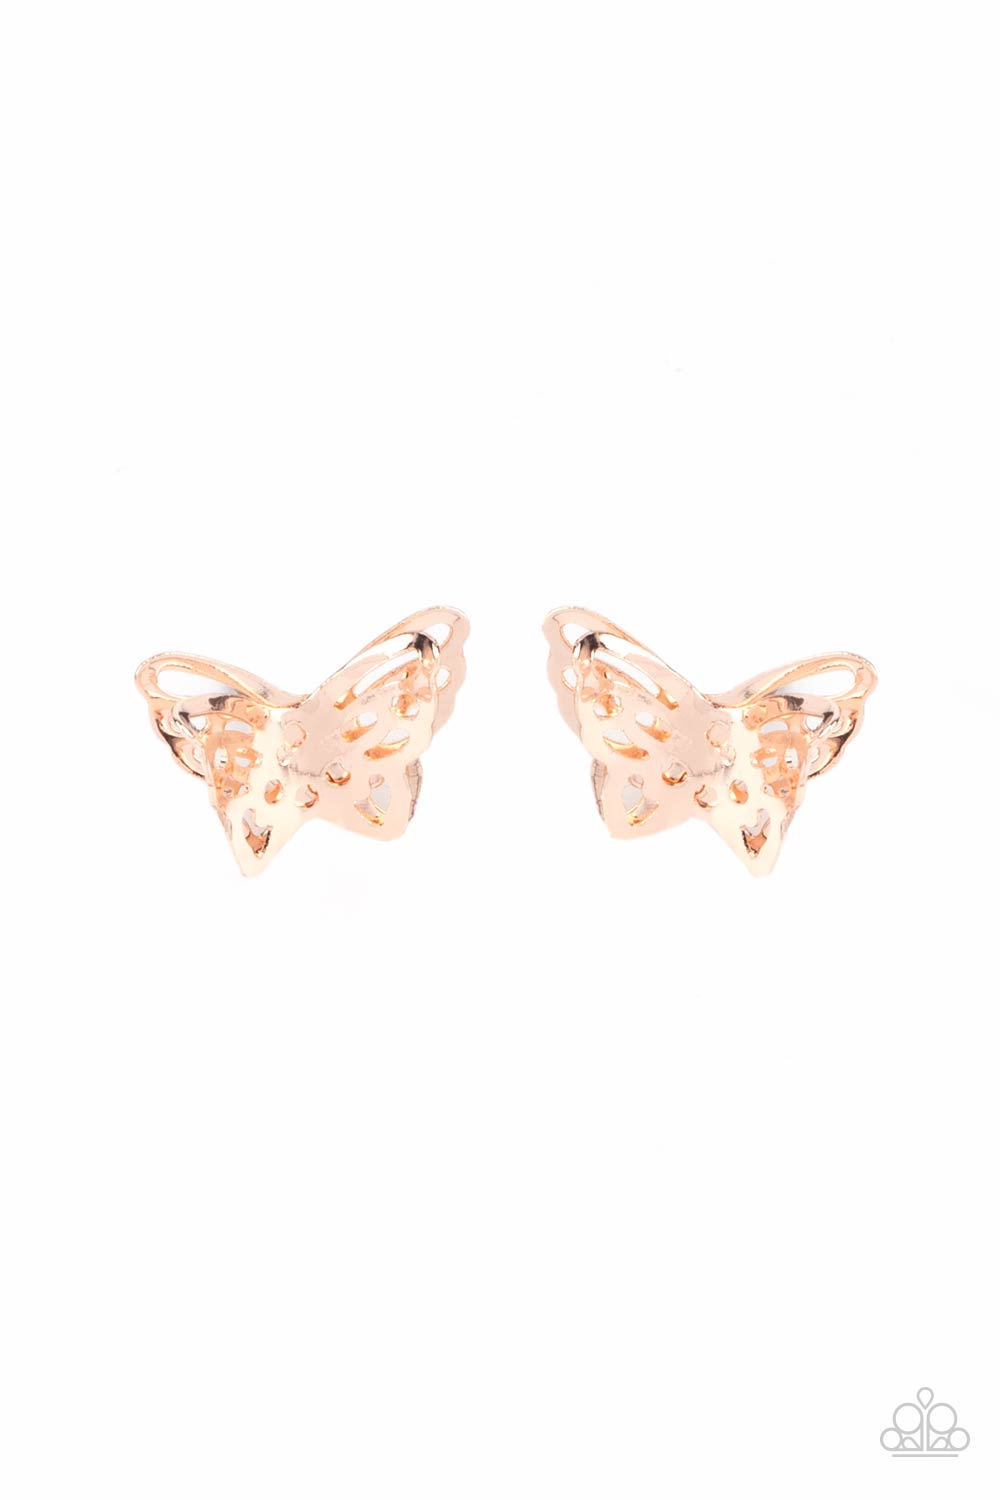 Flutter Fantasy Rose Gold Earring - Paparazzi Accessories.  Delicately stenciled in airy cutouts, two layers of rose gold wings delicately overlap into a fluttery butterfly for a whimsical fashion. Earring attaches to a standard post fitting.  ﻿﻿﻿All Paparazzi Accessories are lead free and nickel free!  Sold as one pair of post earrings.